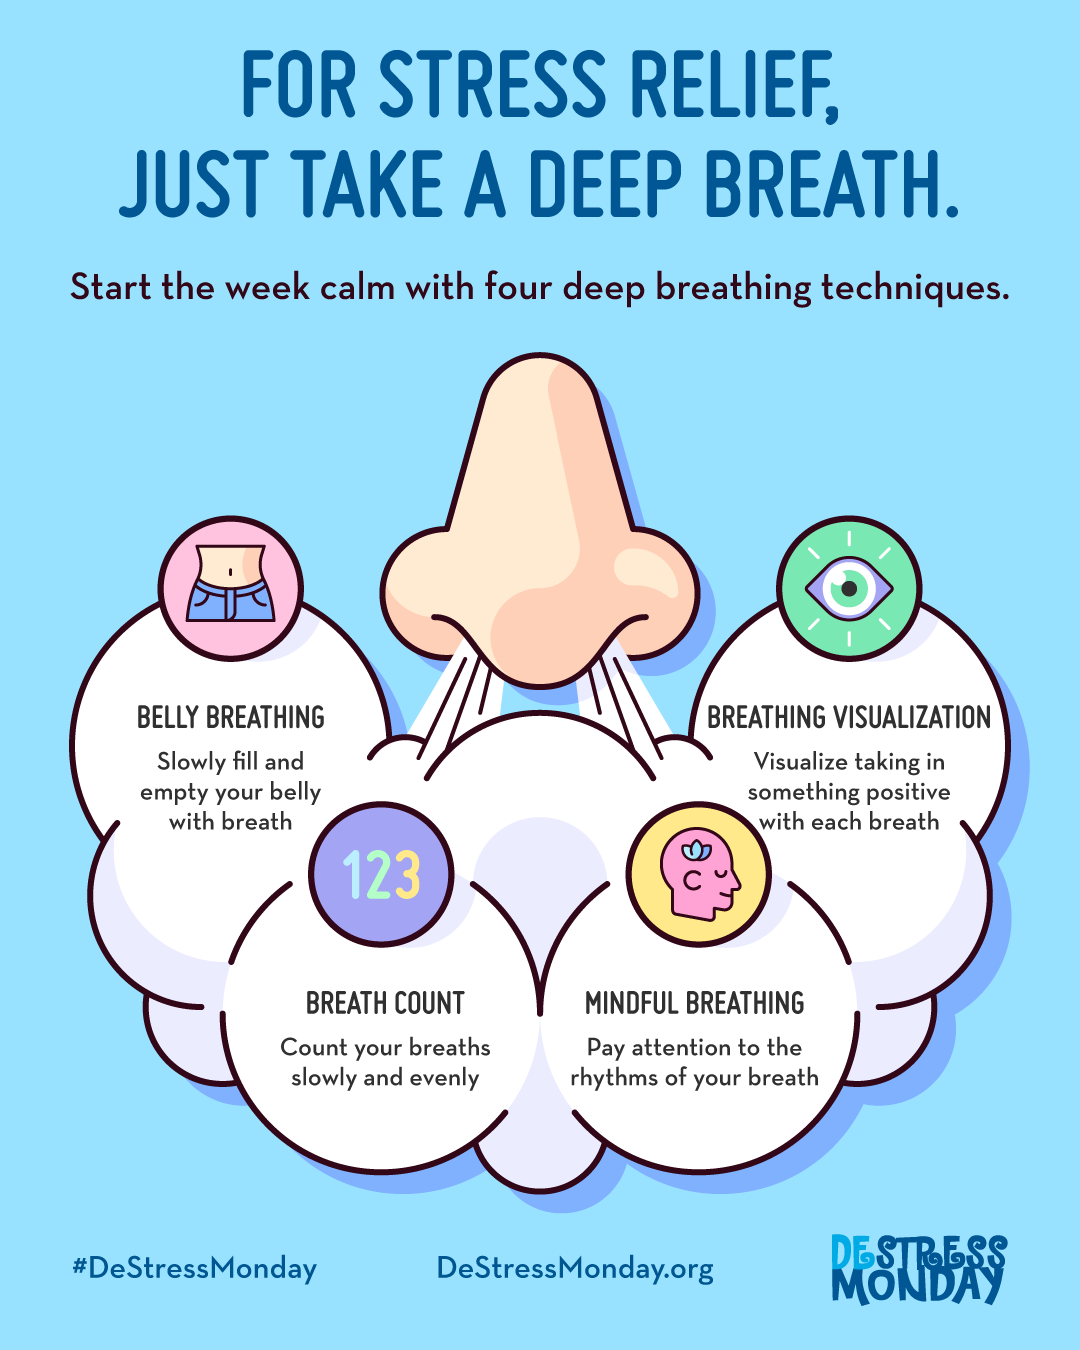 For stress relief, just take a deep breath. Start the week calm with four deep breathing techniques.